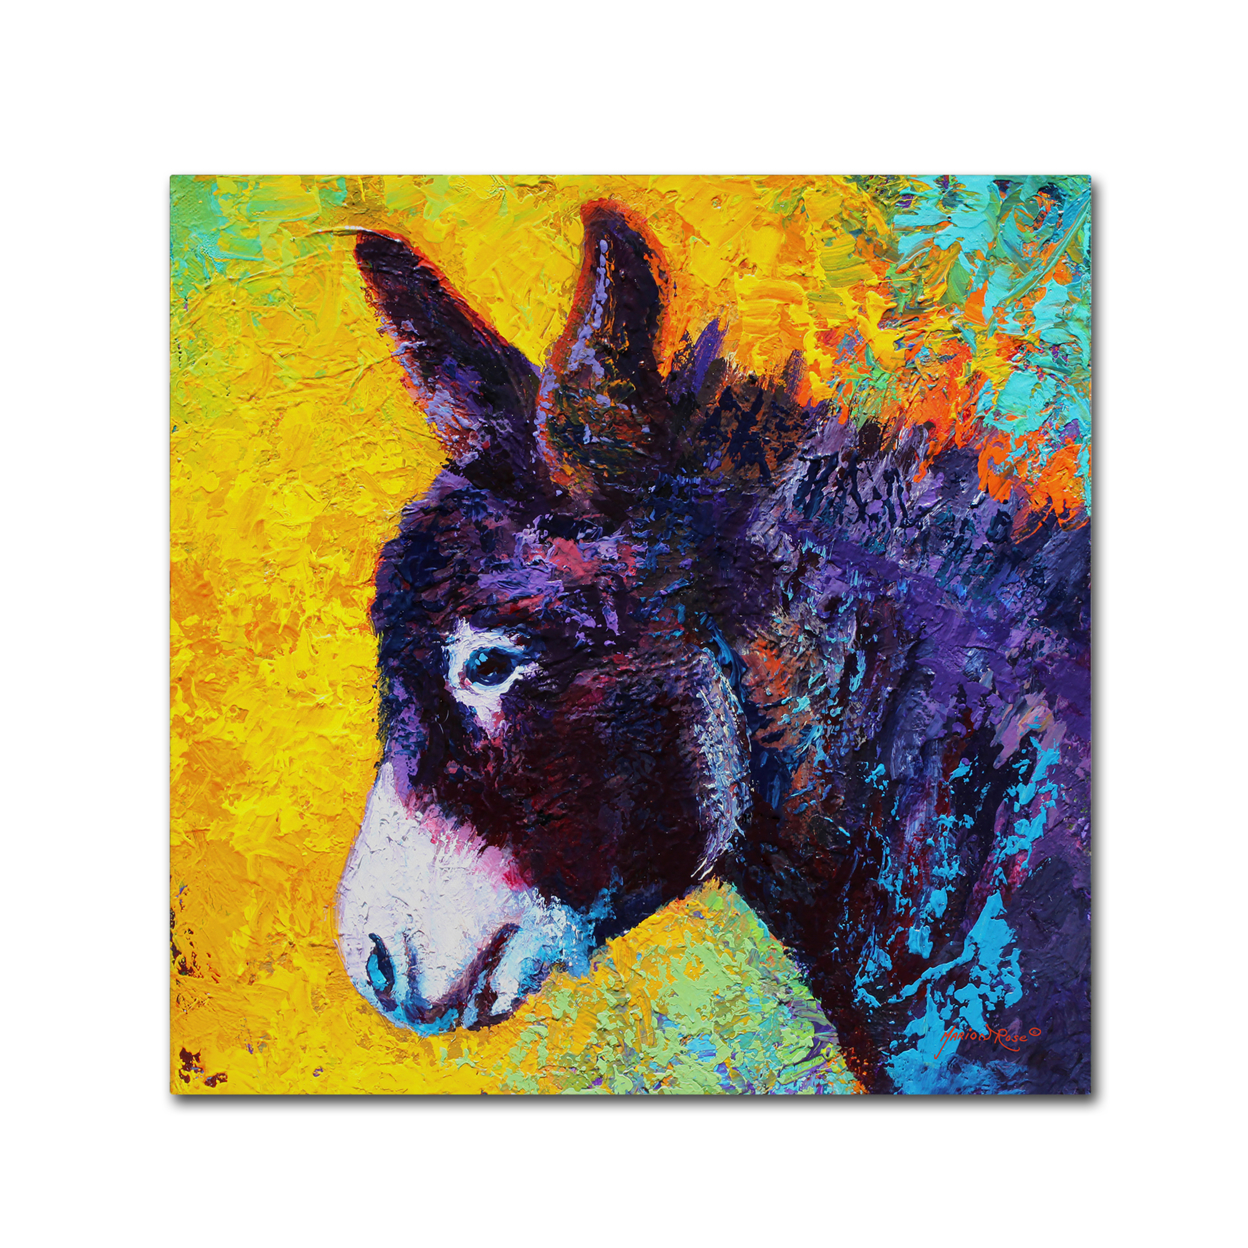 Marion Rose 'Donkey Sparky' Ready To Hang Canvas Art 18 X 18 Inches Made In USA